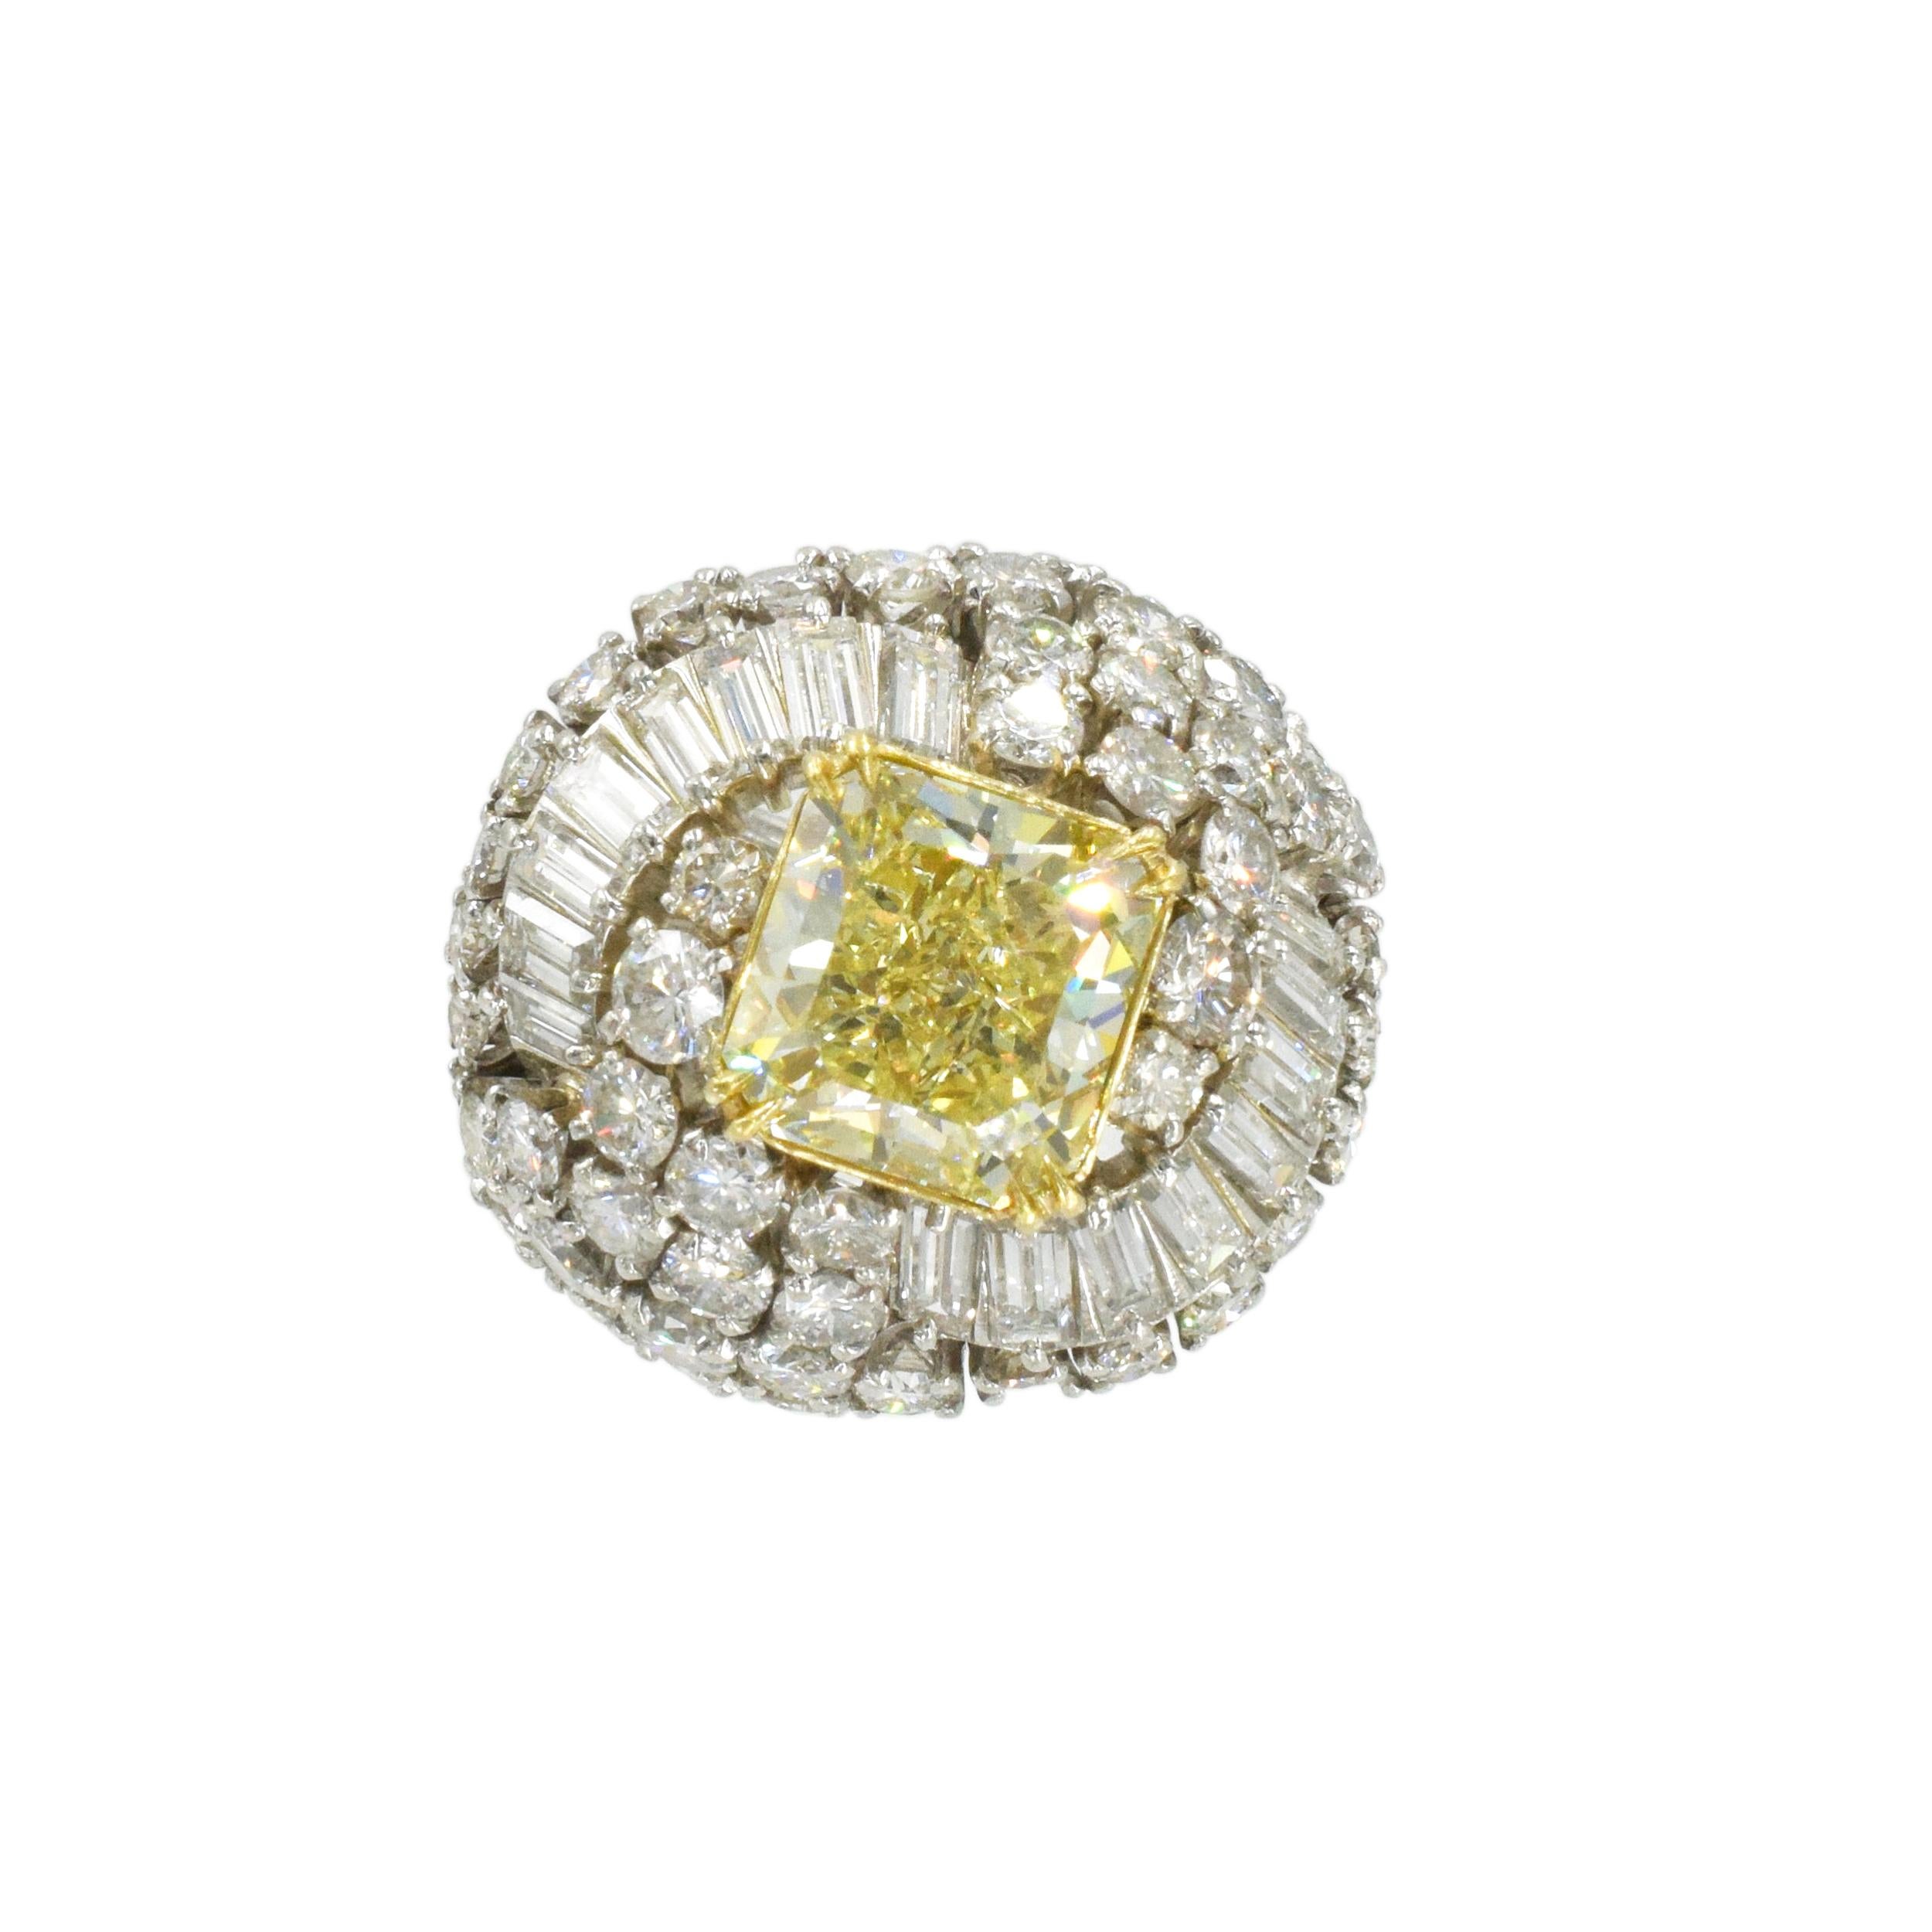 David Webb 5.02 Carat Fancy Yellow Diamond Ring G.I.A. In Excellent Condition In New York, NY